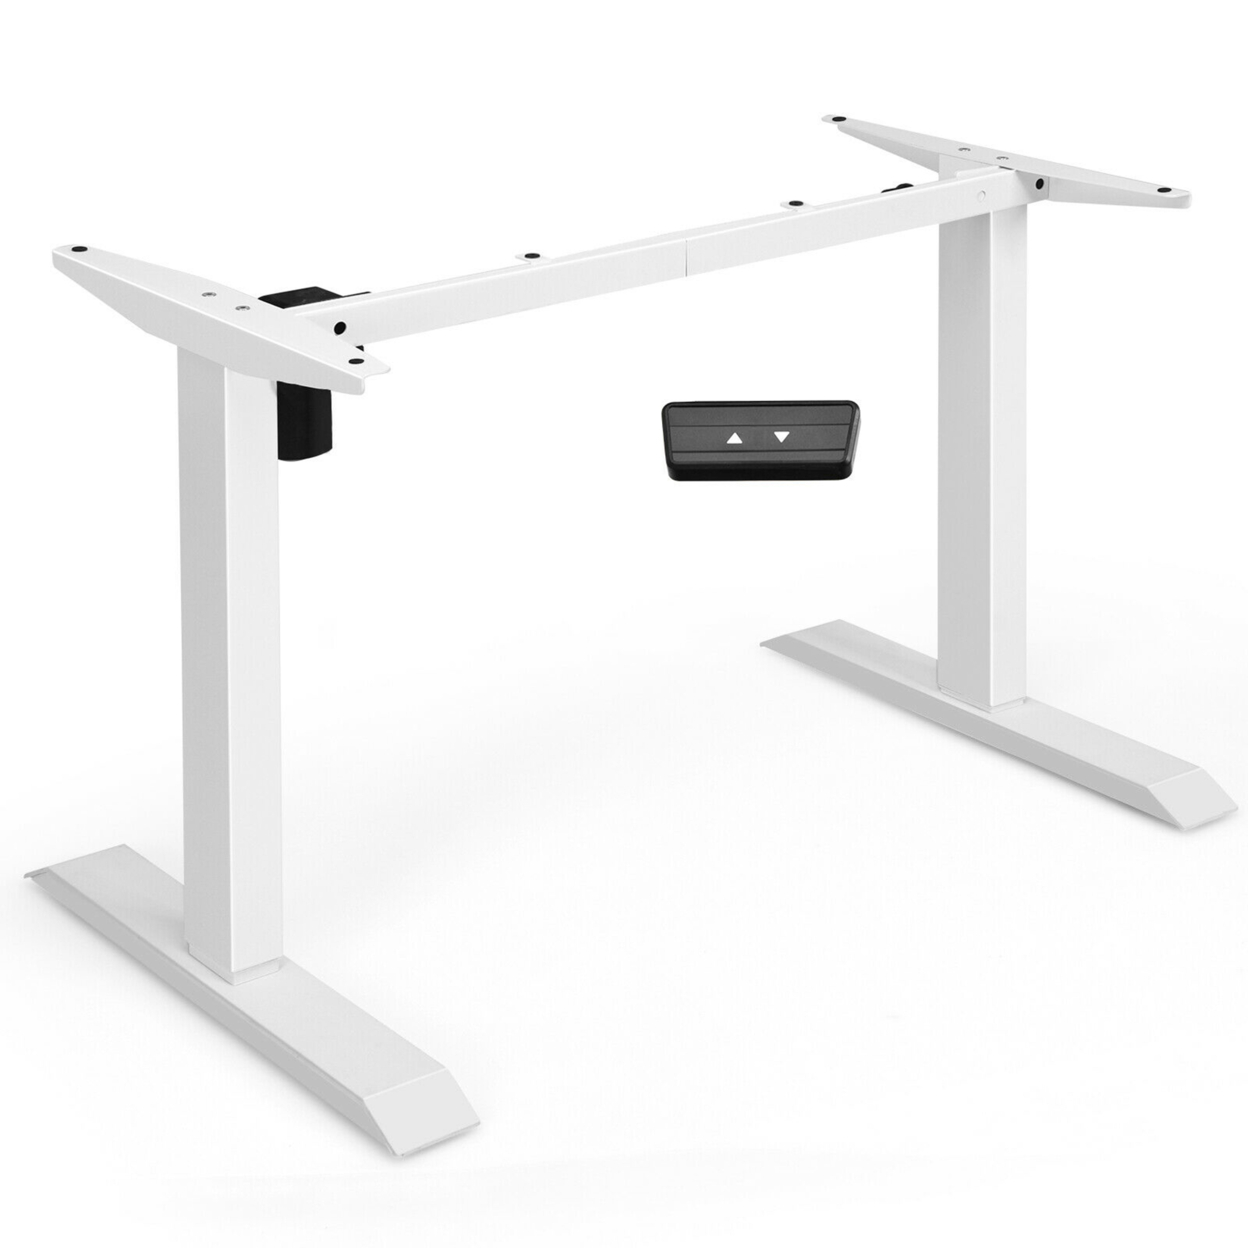 Electric Sit To Stand Adjustable Desk Frame W/ Button Controller - Black